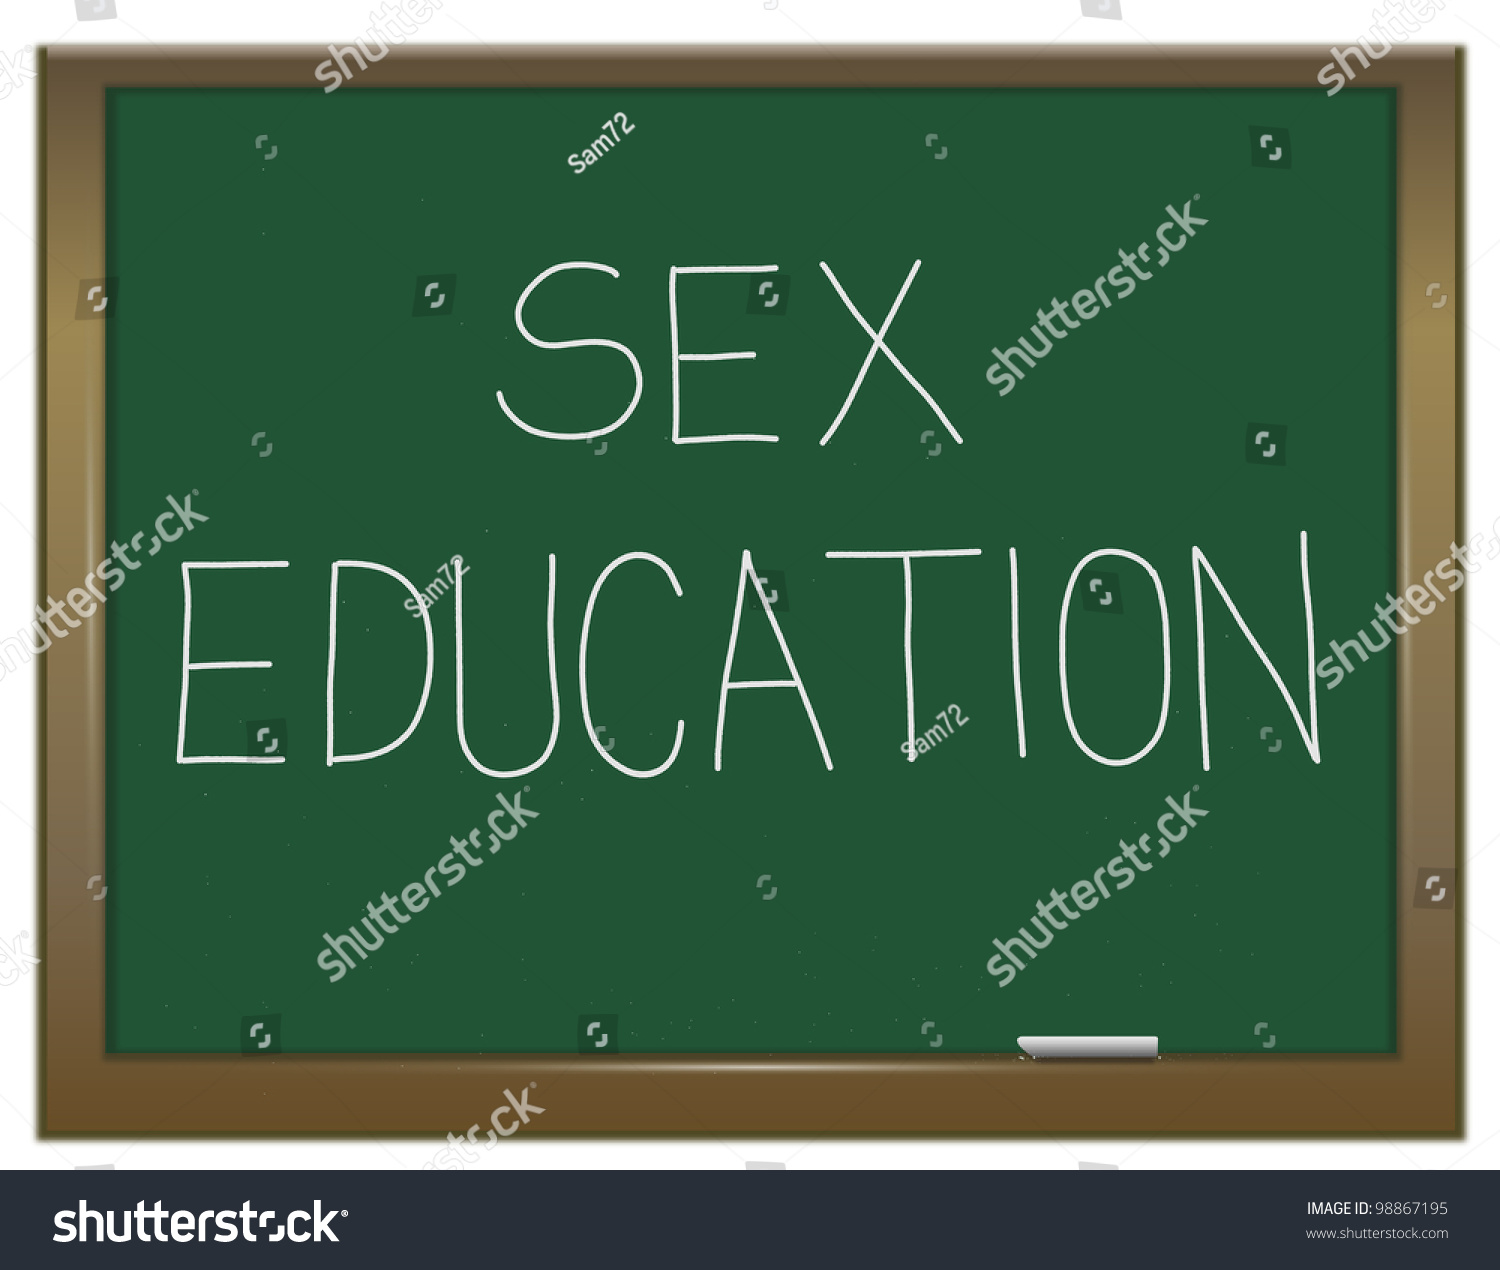 Illustration Depicting A Green Chalkboard With A Sex Education Concept Written On It 98867195